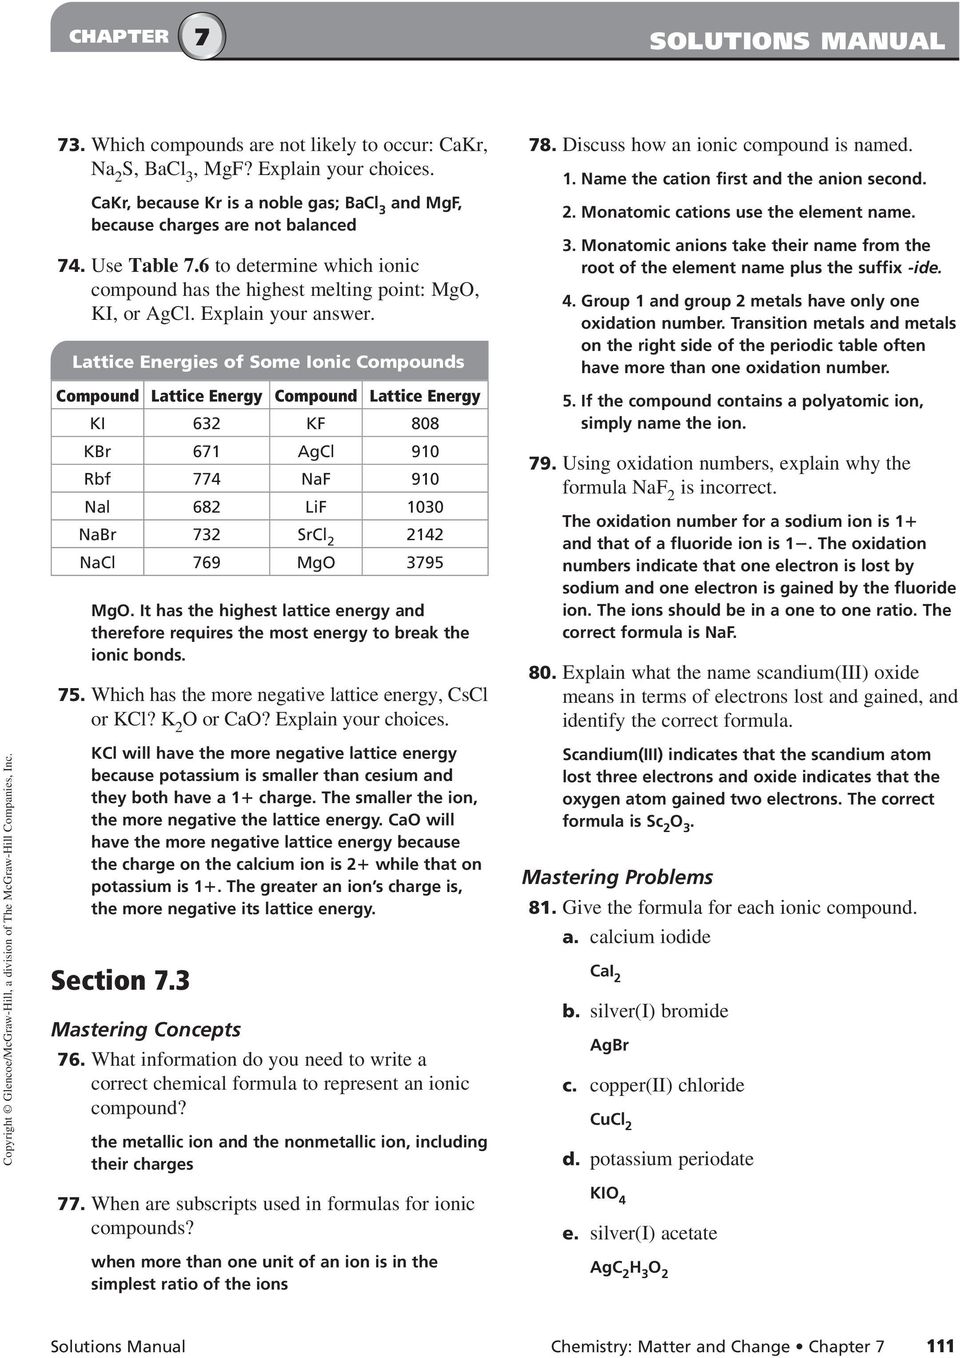 Ionic Compounds And Metals Pdf Free Download